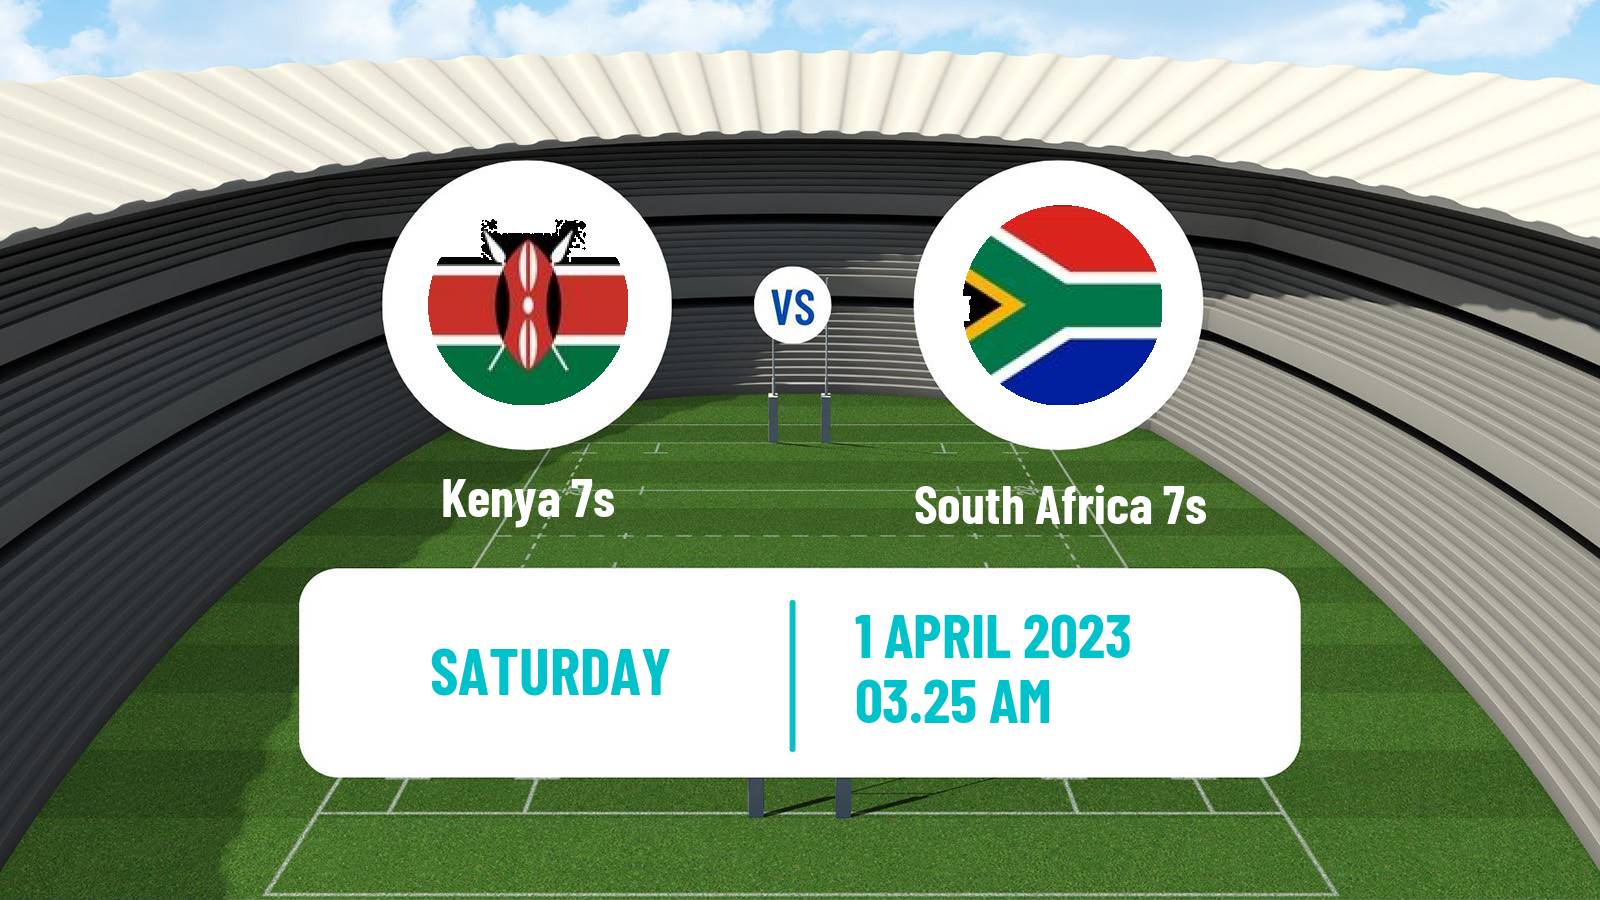 Rugby union Sevens World Series - Hong Kong 2 Kenya 7s - South Africa 7s